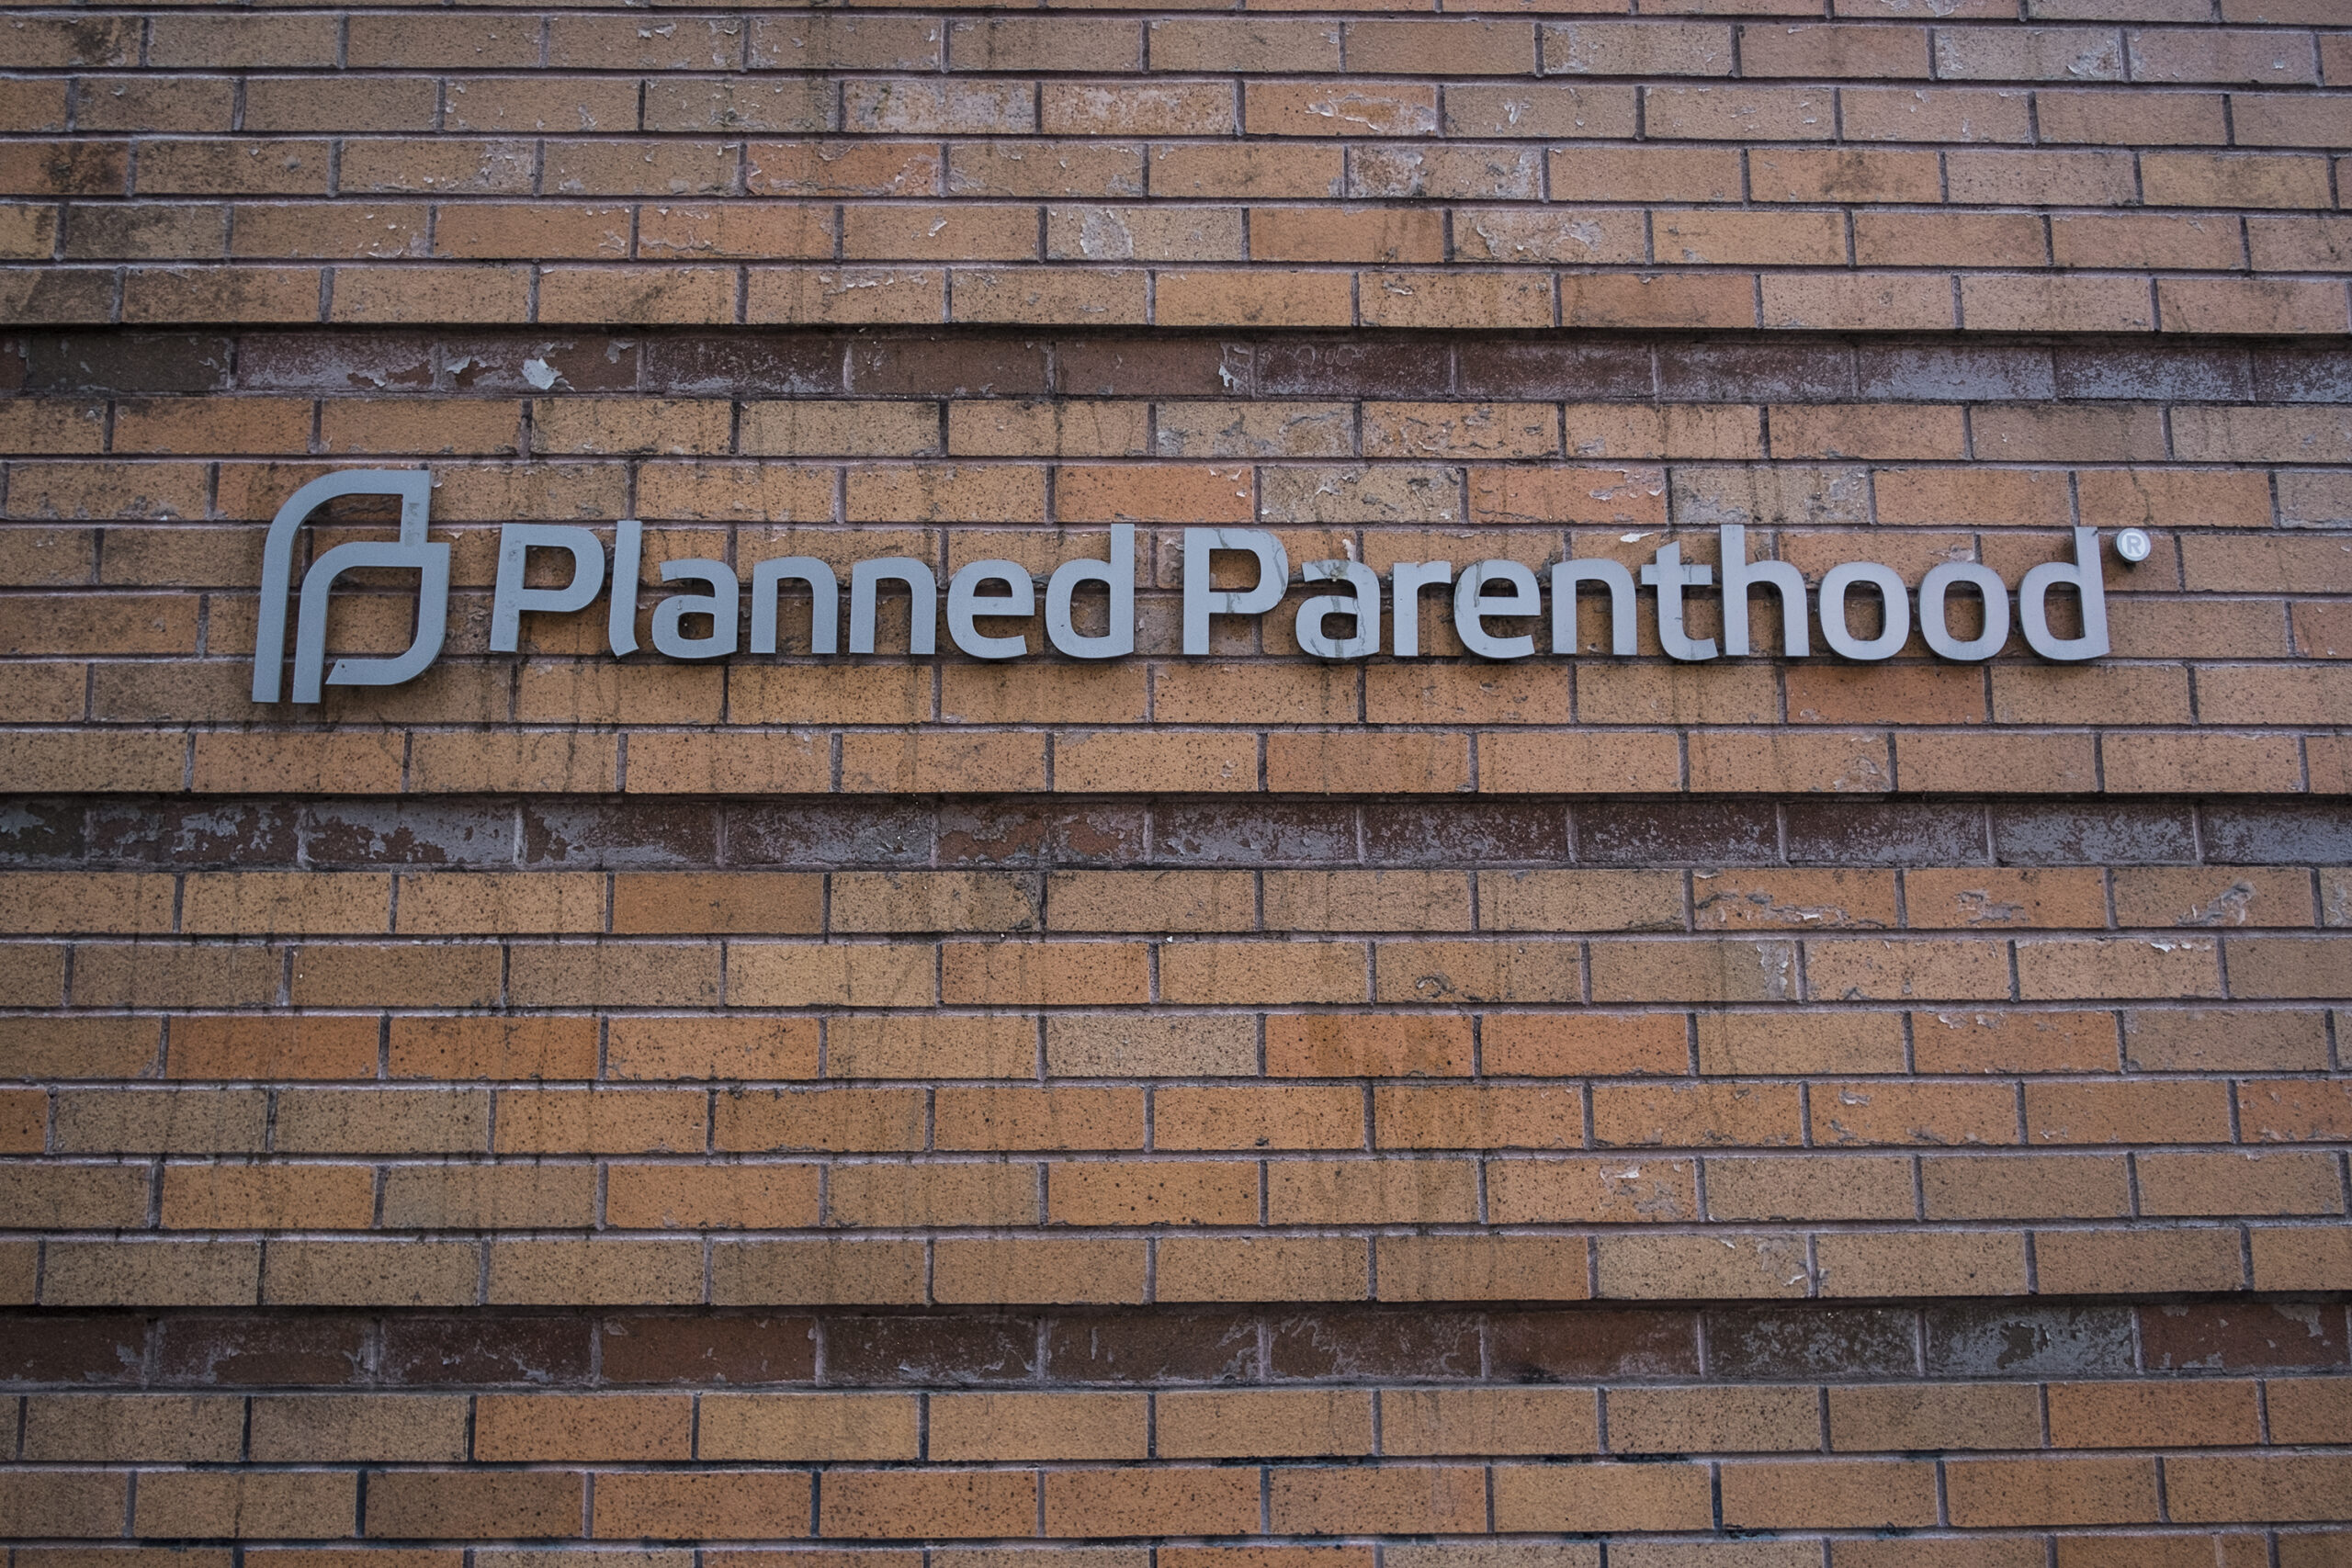 Planned Parenthood Aborted Nearly 375,000 Unborn Children Last Year: Report